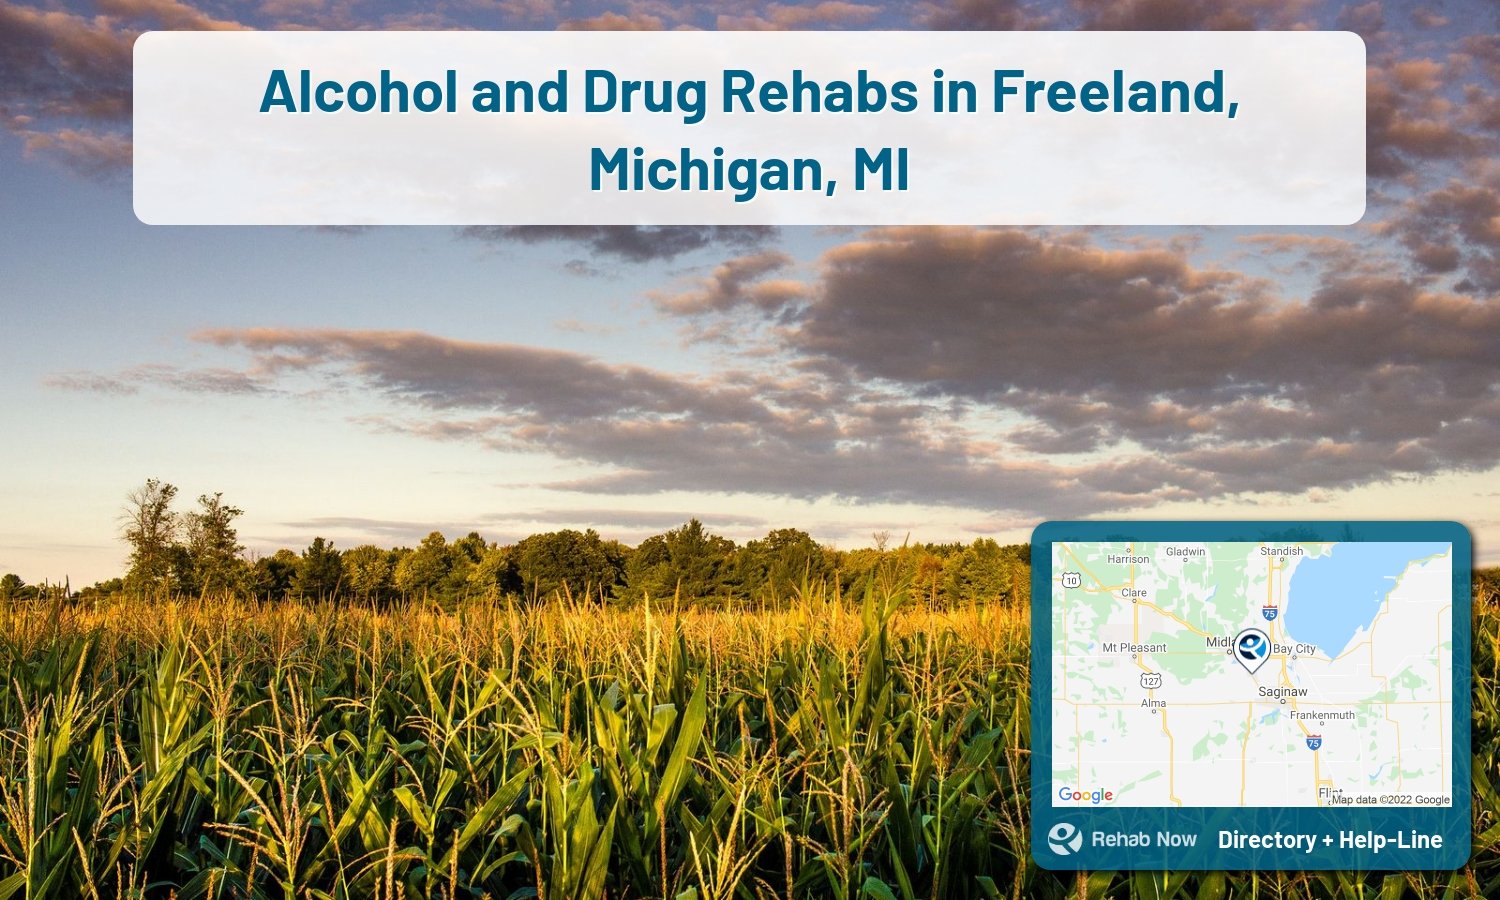 Let our expert counselors help find the best addiction treatment in Freeland, Michigan now with a free call to our hotline.